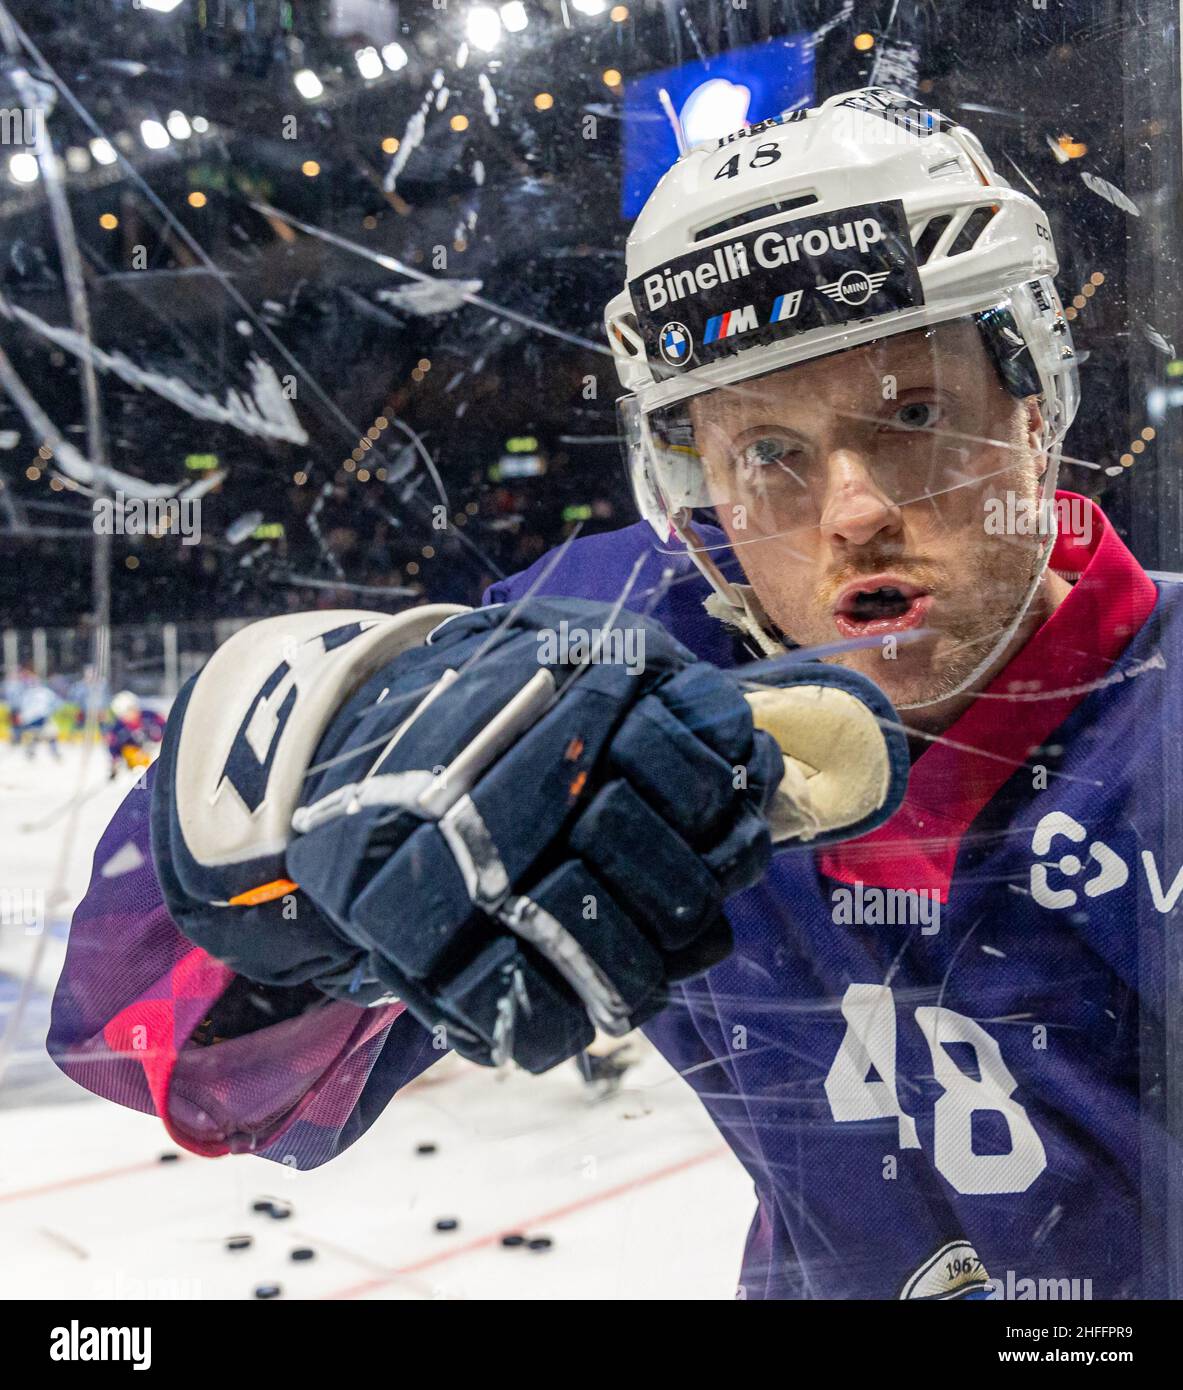 Carl Klingberg #48 (EV Zug) greets his photographer during the National League Regular Season ice hockey game between the ZSC Lions and EV Zug on January 16, 2022 in the Hallenstadion in Zurich. (Photo by Philipp Hegglin/Just Pictures/Sipa USA) Stock Photo